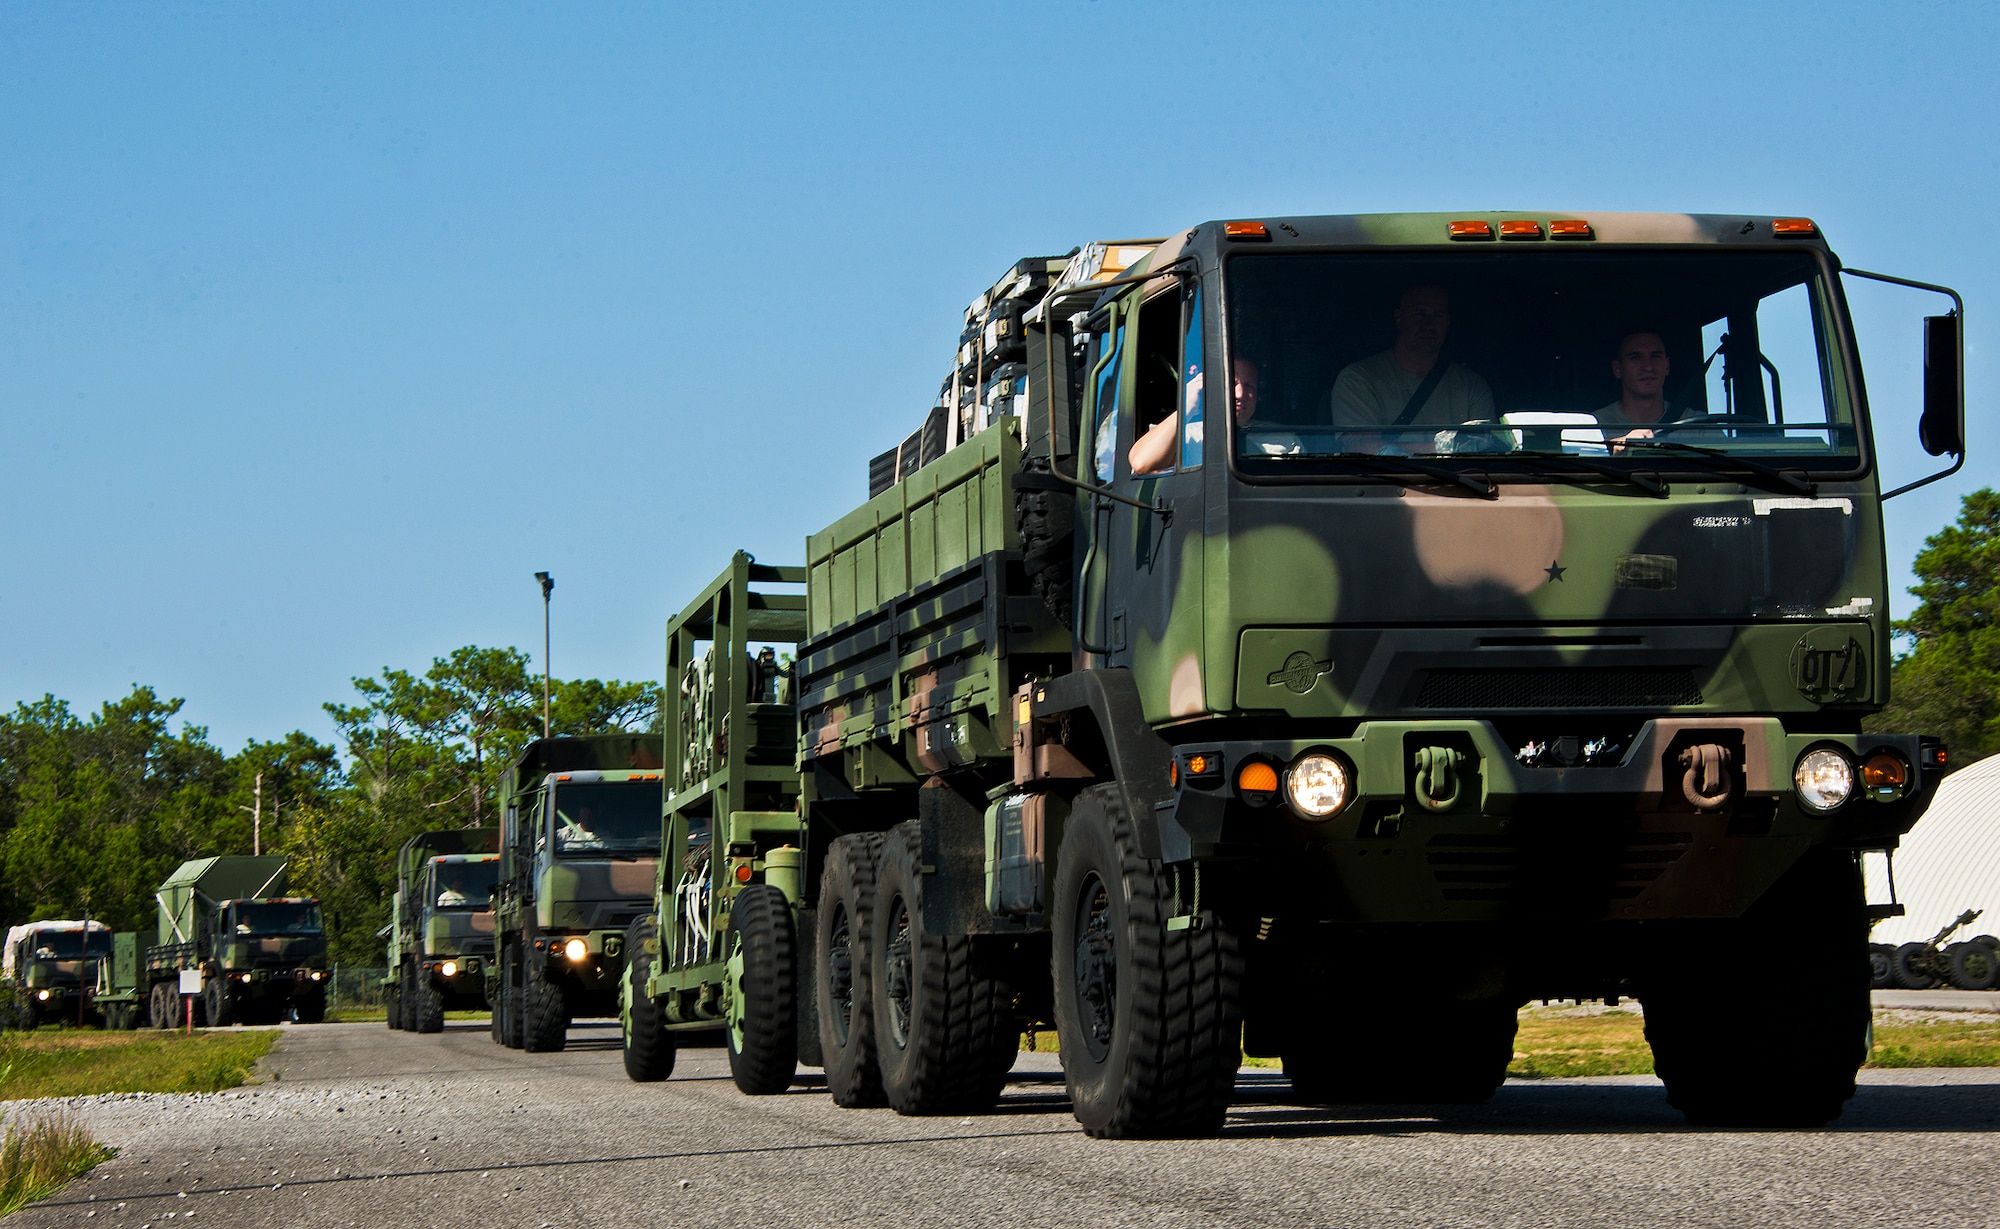 A convoy of 728th Air Control Squadron Airmen, vehicles and equipment roll out beginning the squadron’s deployment readiness exercise called Bison Fury July 24 at Eglin Air Force Base, Fla.  This exercise marks the last large-scale exercise for the squadron, which is scheduled to be deactivated in 2013.  (U.S. Air Force photo/Samuel King Jr.)